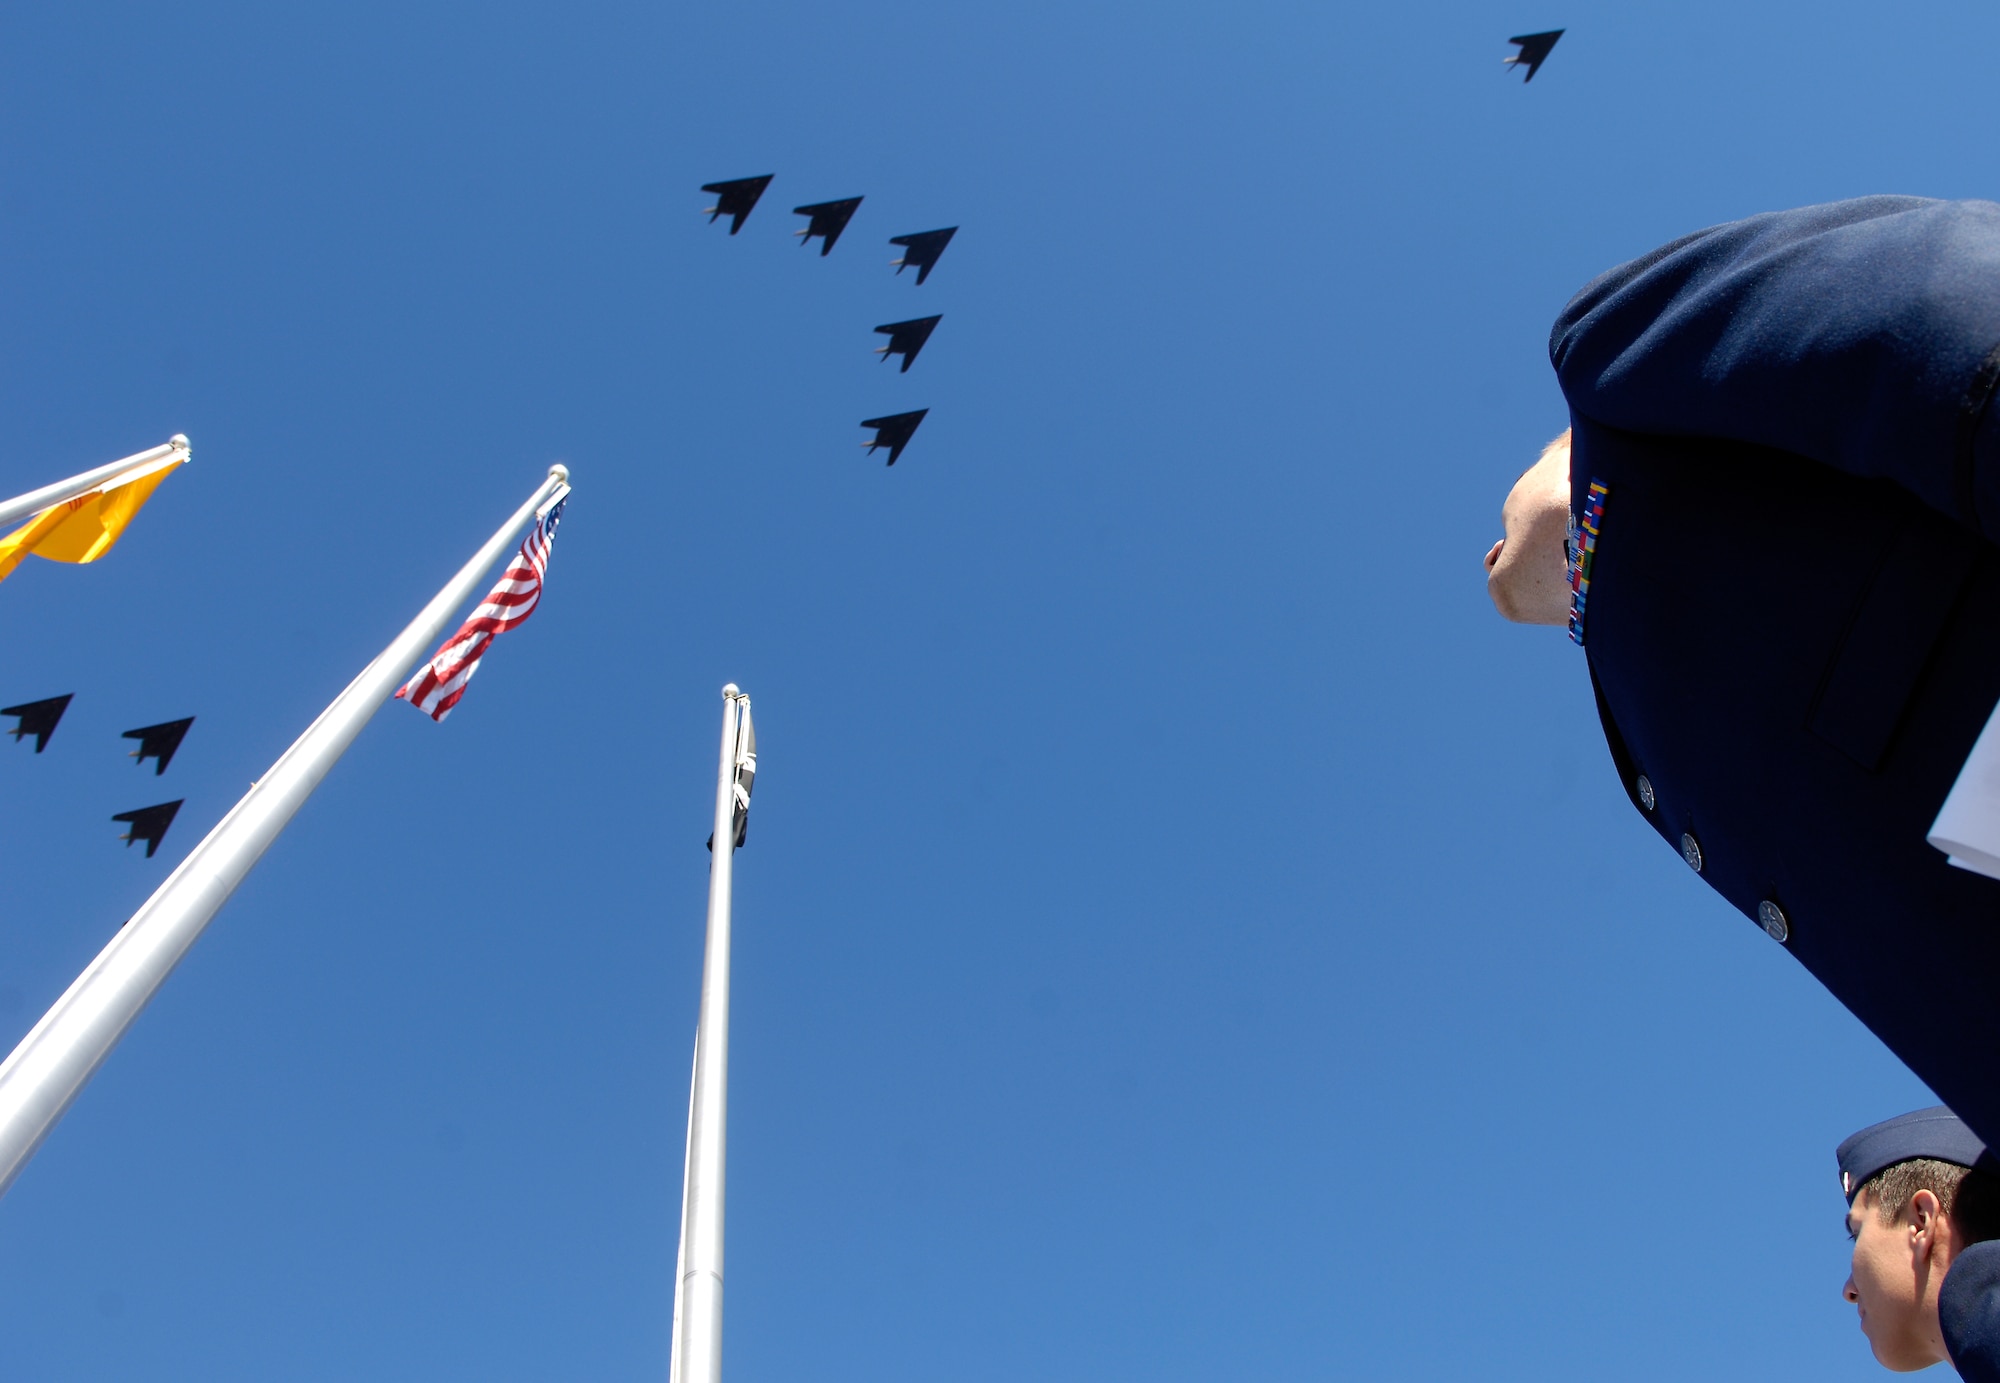 Capt. Heath Armstrong (front) and 2nd Lt. Scott Panzer watch as a formation of F-117 Nighthawks pass overhead. The formation was part of the Nighthawk's 25th anniversary and 250,000 flying-hour celebration at Holloman Air Force Base, N.M.  The formation consisted of 25 planes staggered into five separate groups. Captain Armstrong and Lieutenant Panzer are part of the 49th Operations Support Squadron. 
(U.S. Air Force photo/Senior Airman Brian Ferguson)